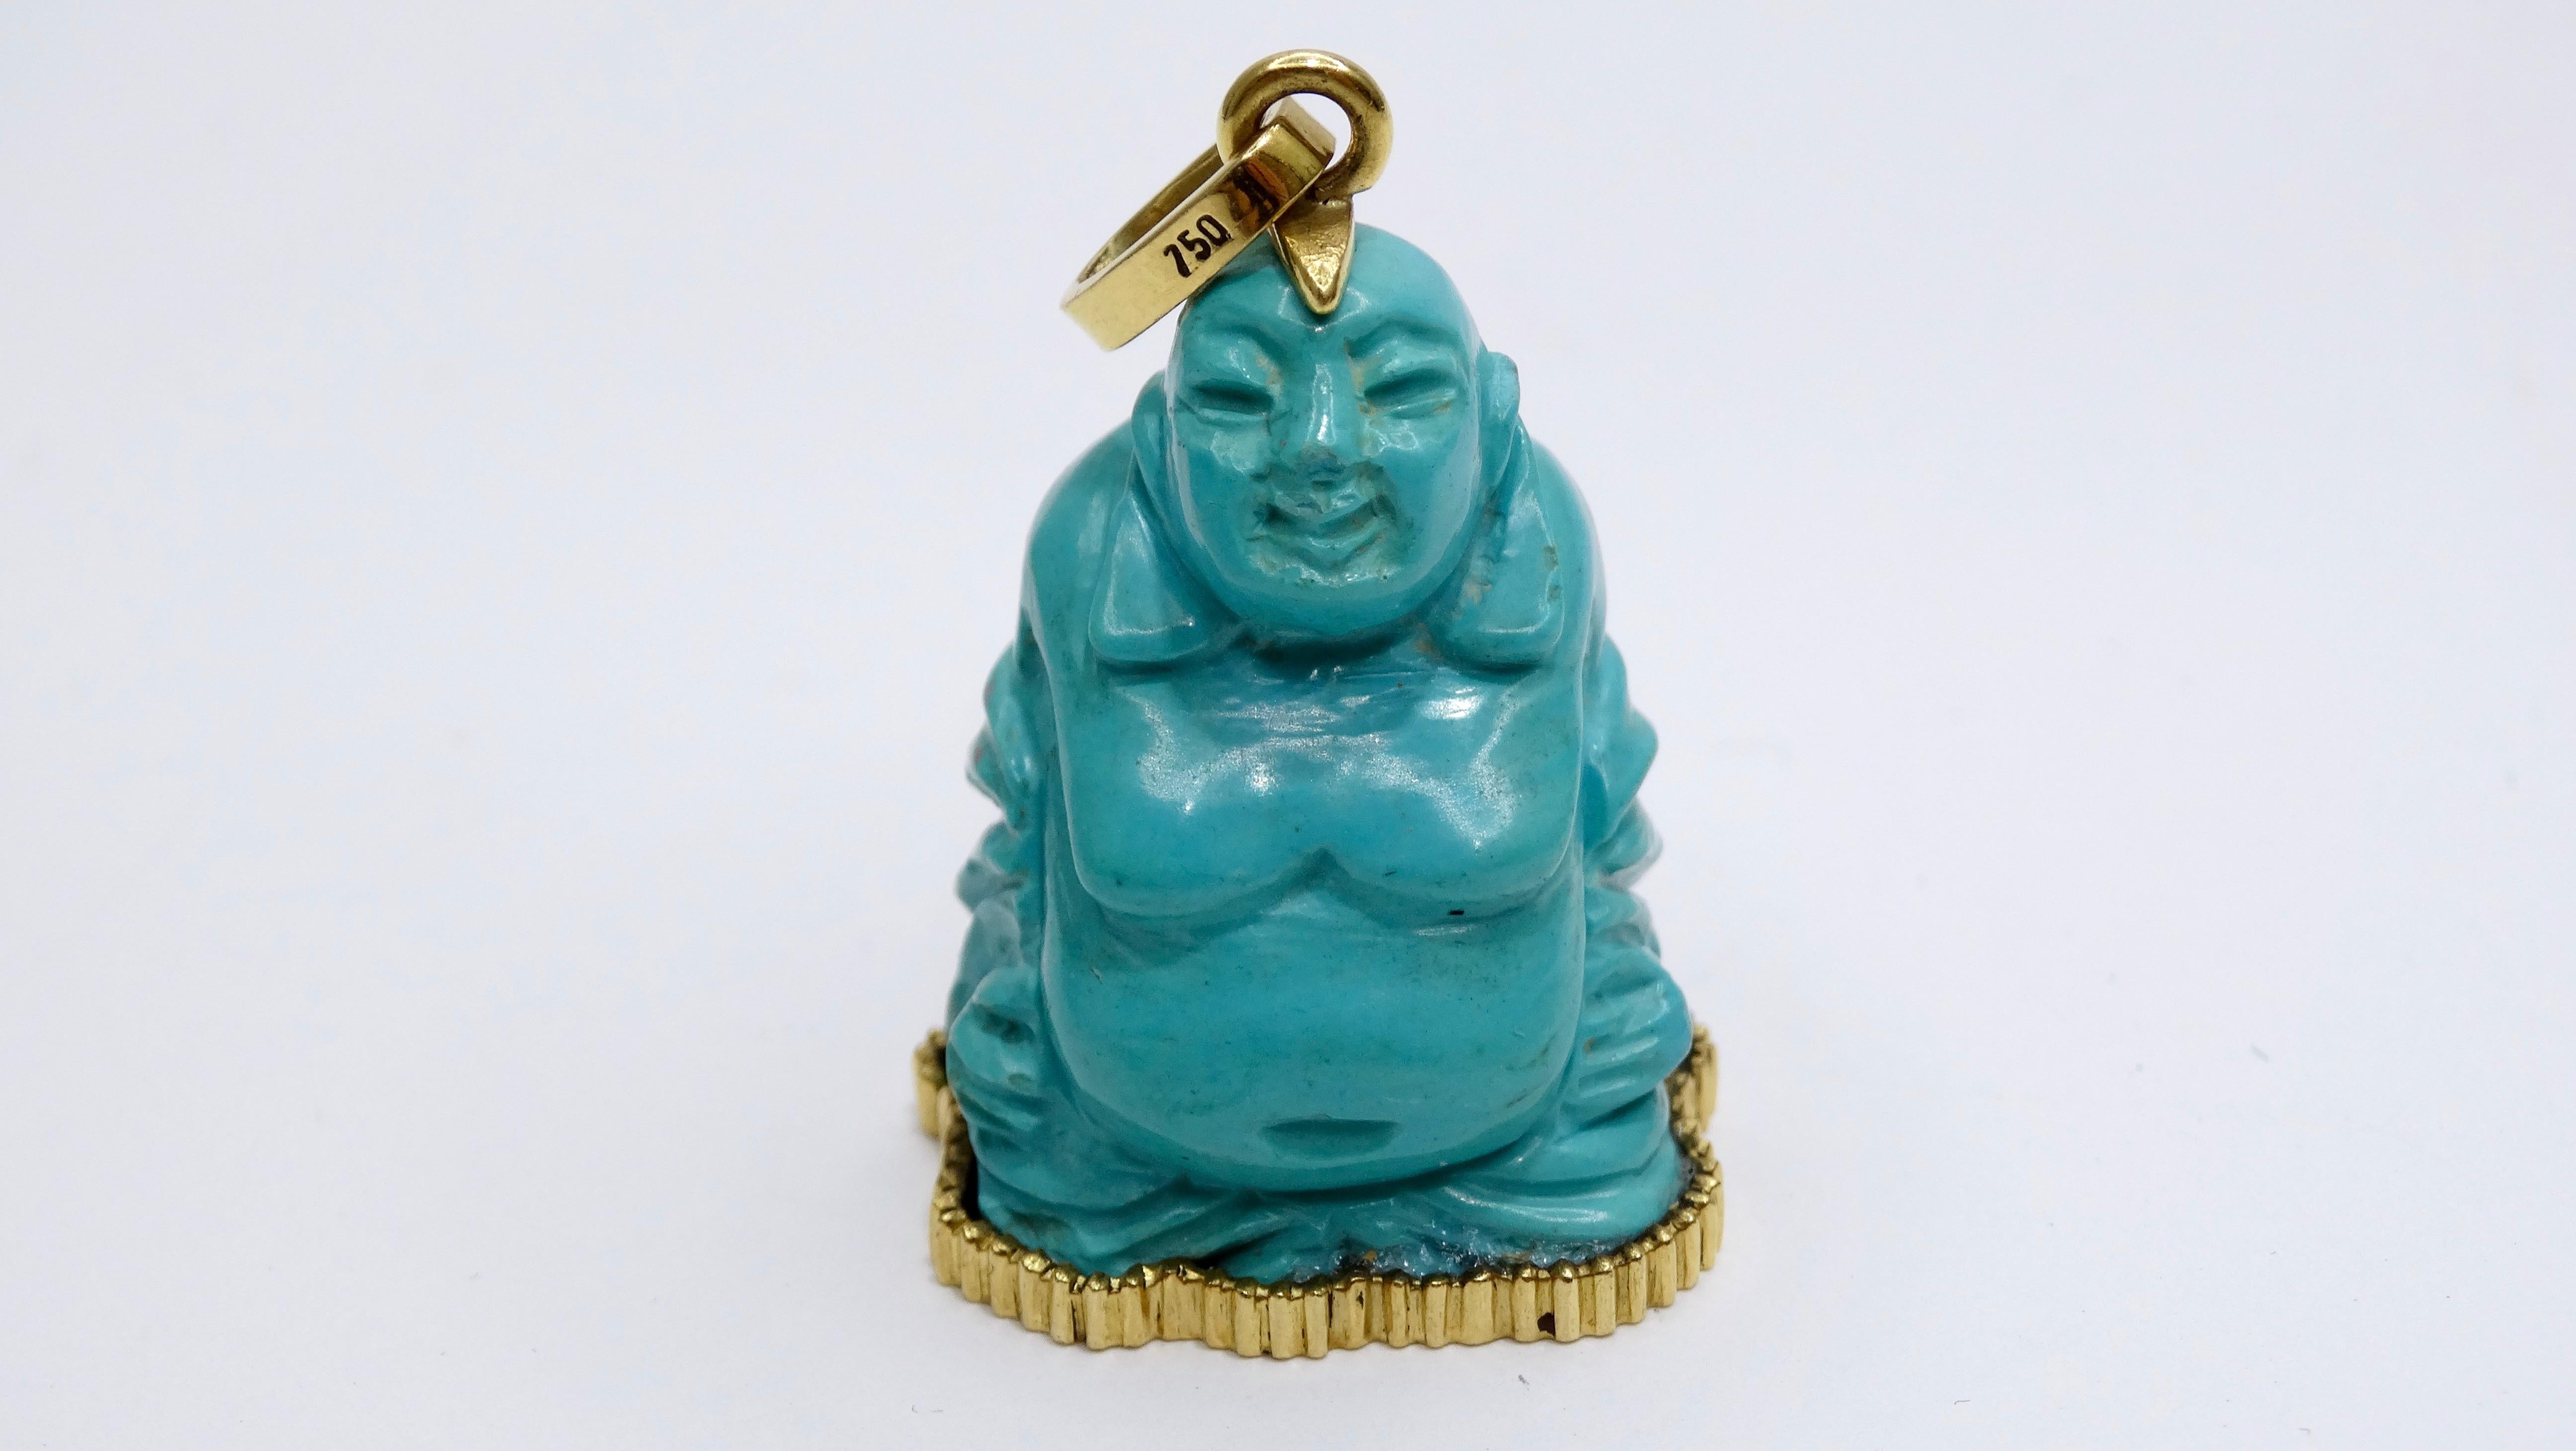 This large vintage sleeping beauty turquoise Budda pendant is beautiful and collectable. If bohemian and eclectic style is your vibe, add a beautifully crafted pendant to your favorite chain and elevate your outfit. Pair this with a vintage printed